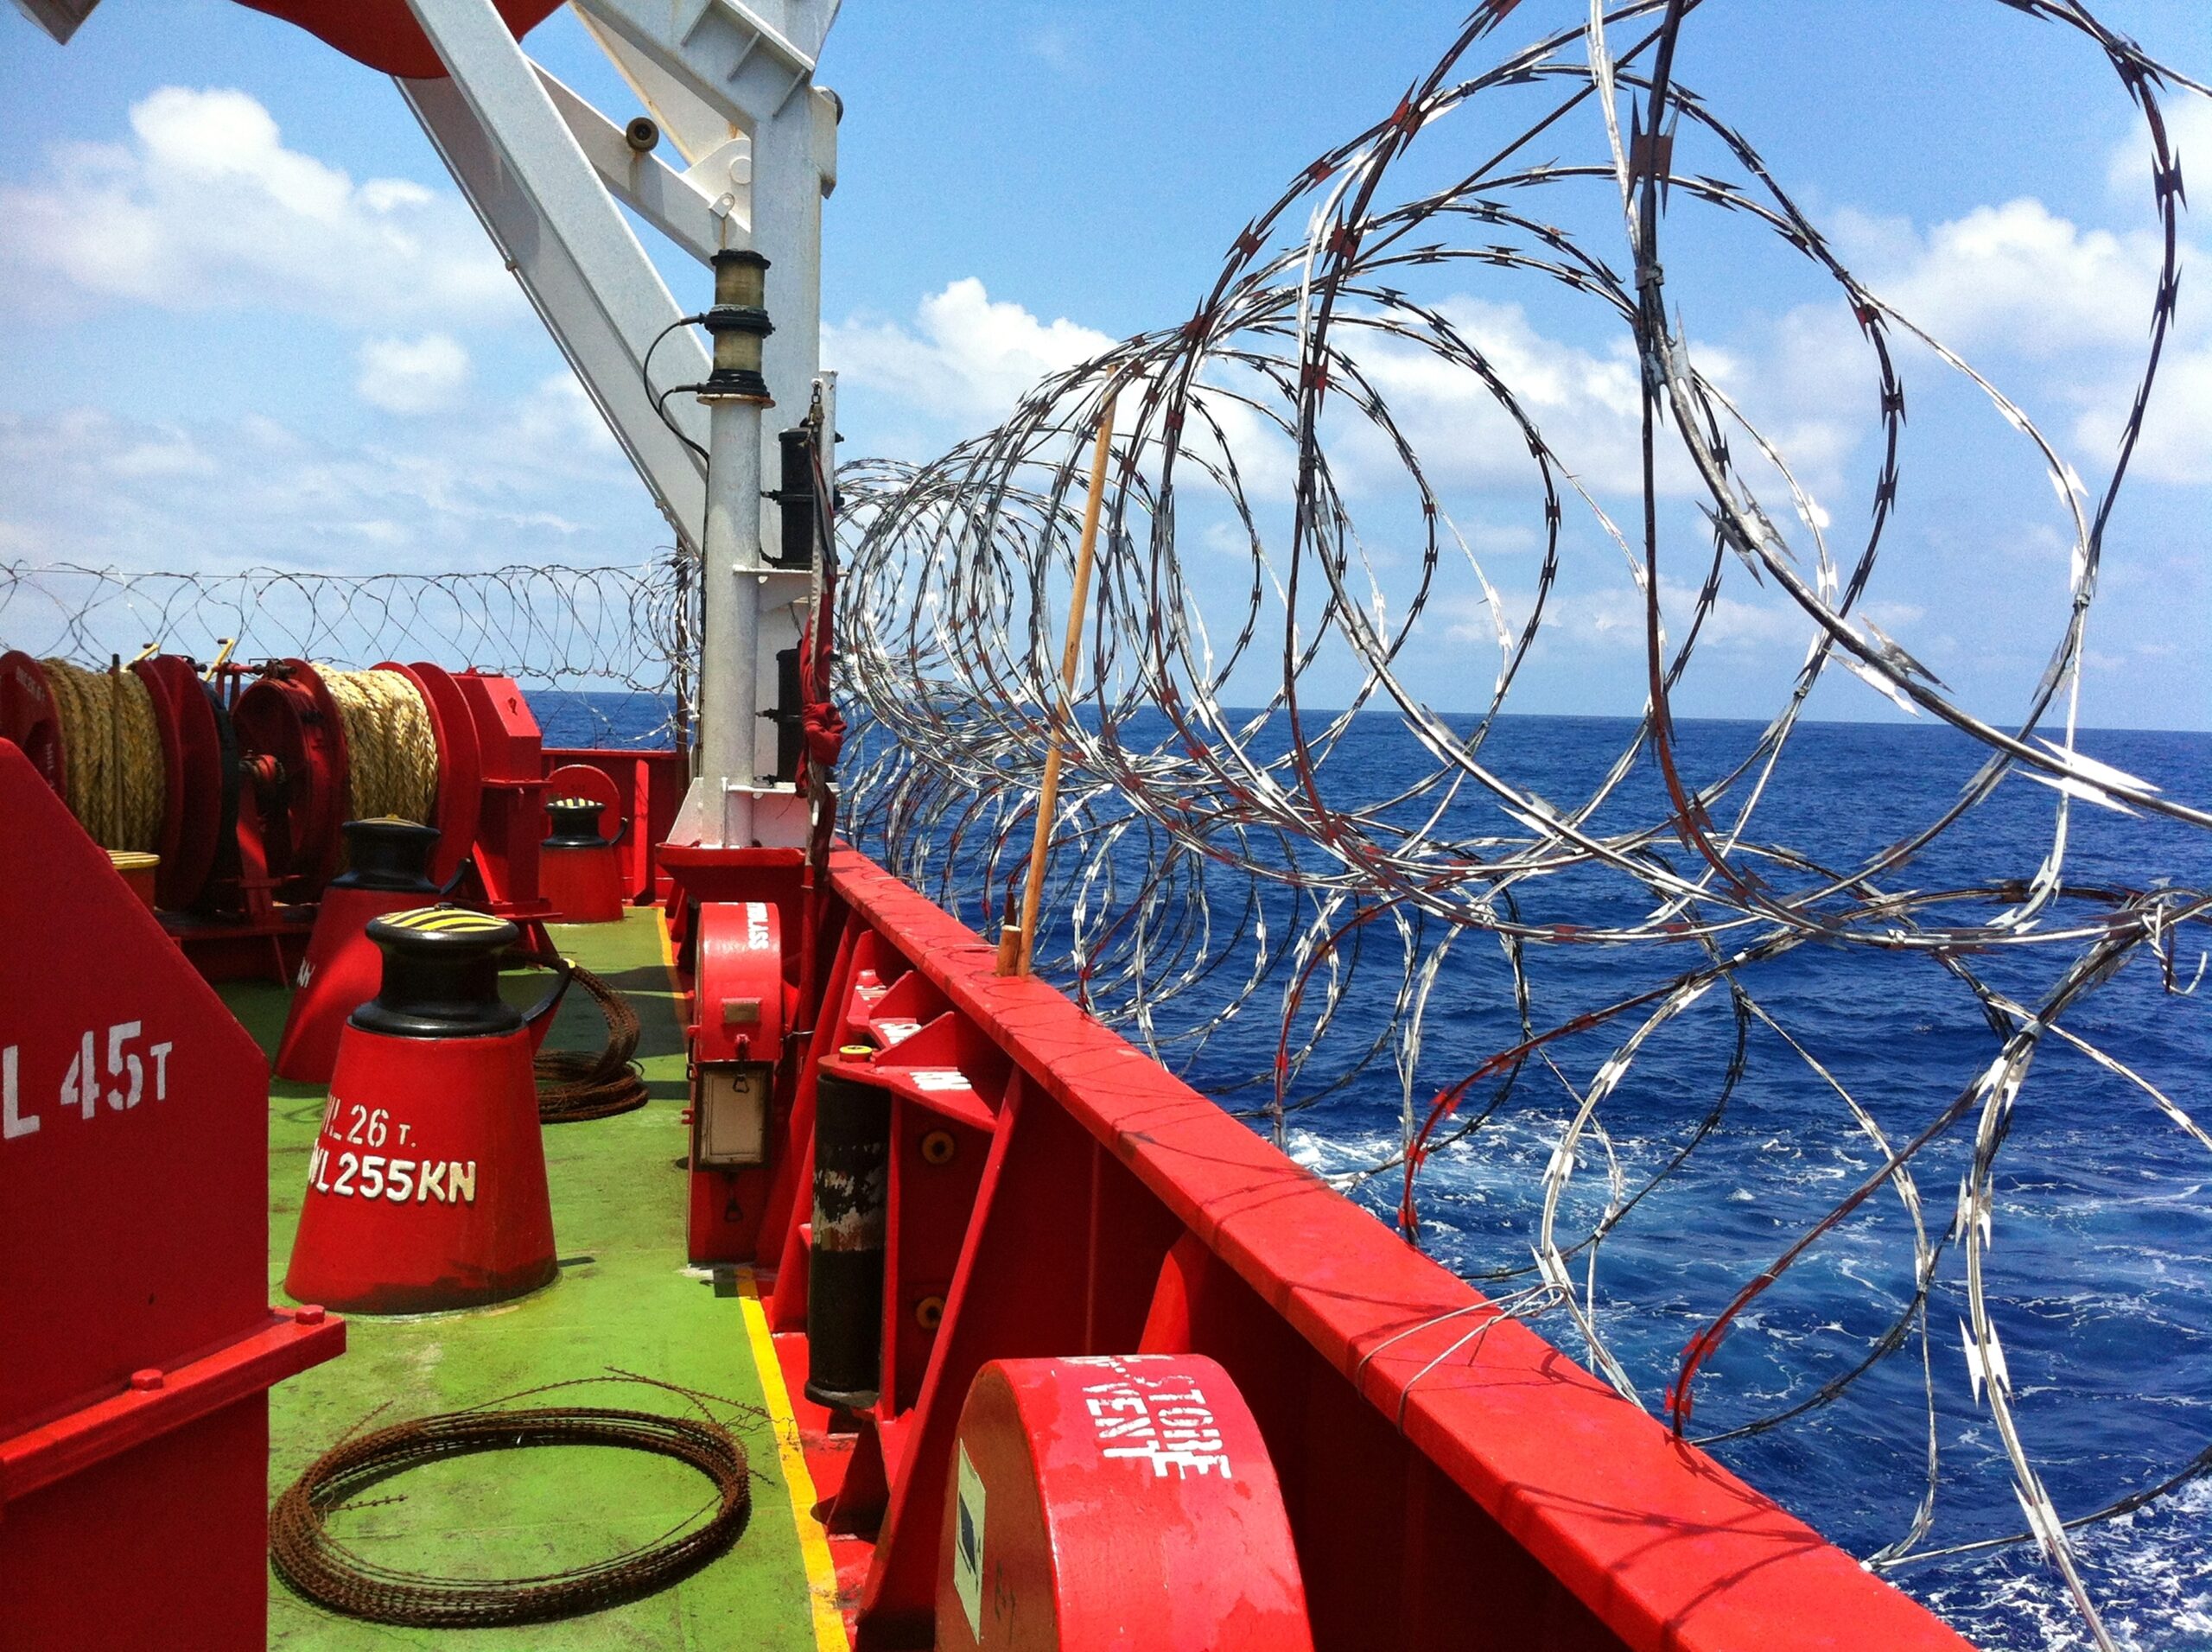 Barbed wire is twisted on board the tanker to protect against pirate attacks